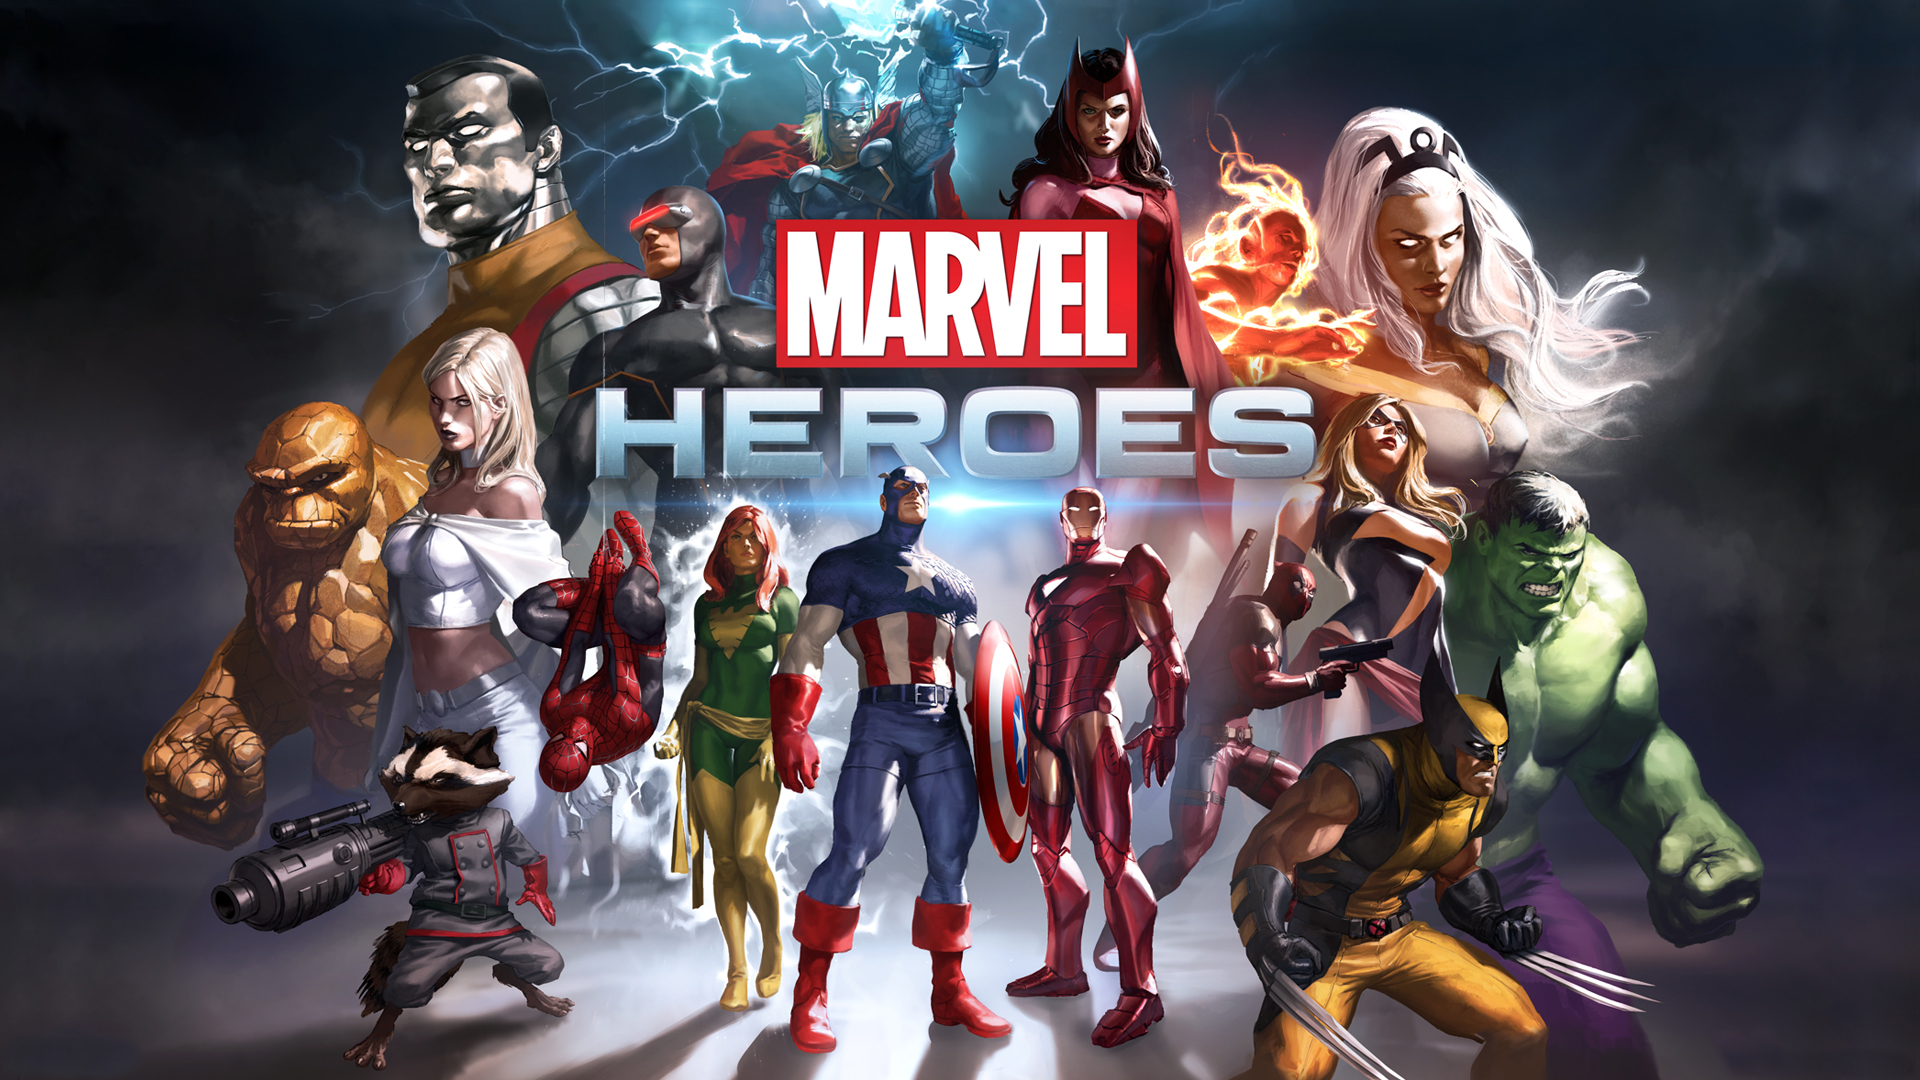 Marvel Heroes Game Wallpapers HD Wallpapers 1920x1080